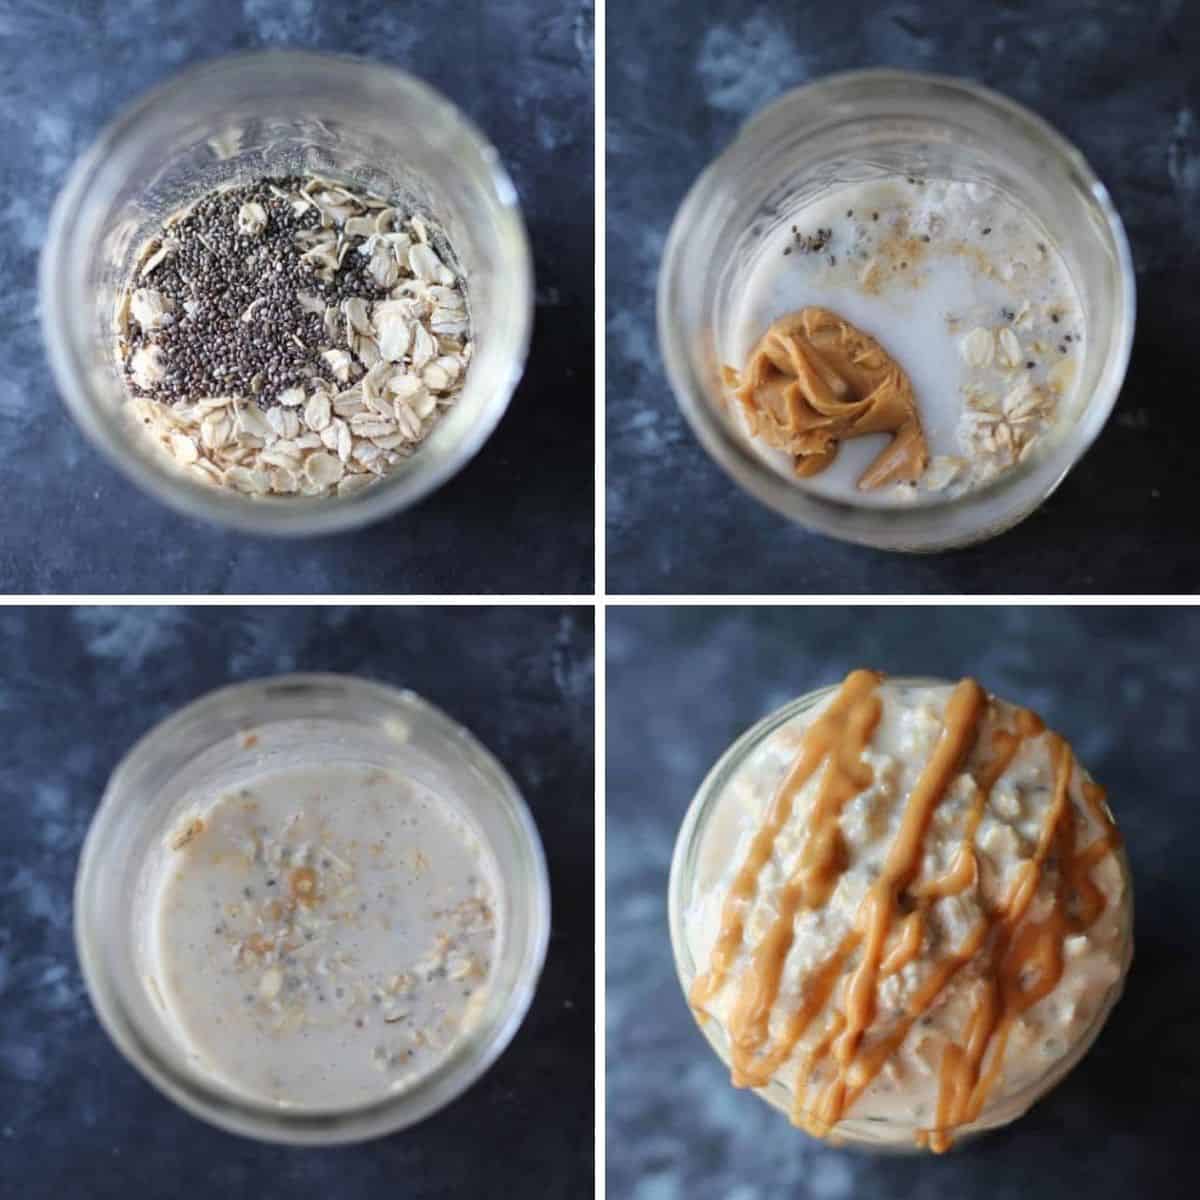 https://www.organizeyourselfskinny.com/wp-content/uploads/2022/03/step-by-step-collage-of-overnight-oats.jpg